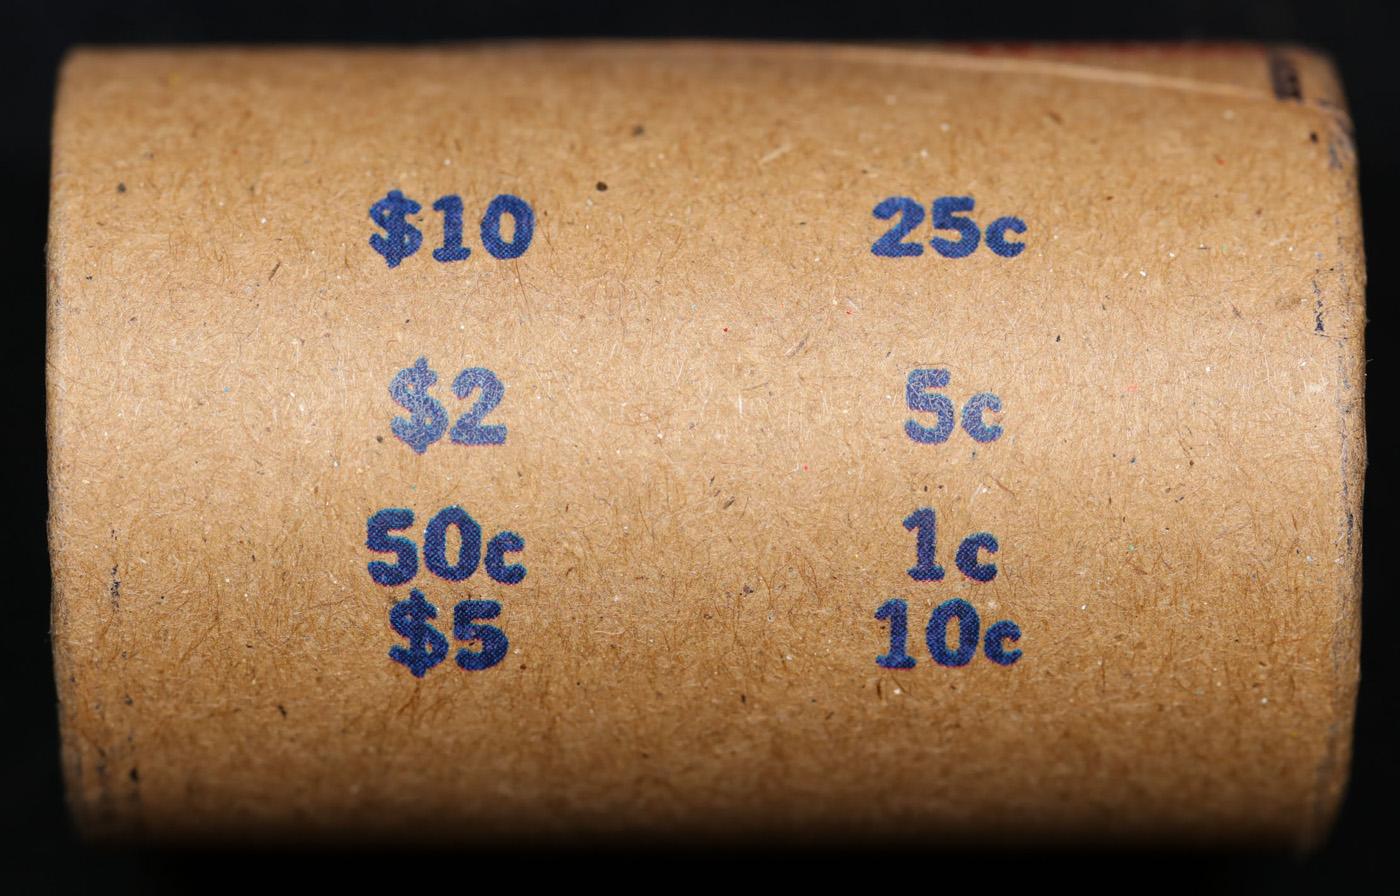 High Value! - Covered End Roll - Marked "Unc Morgan Extraordinary" - Weight shows x20 Coins (FC)